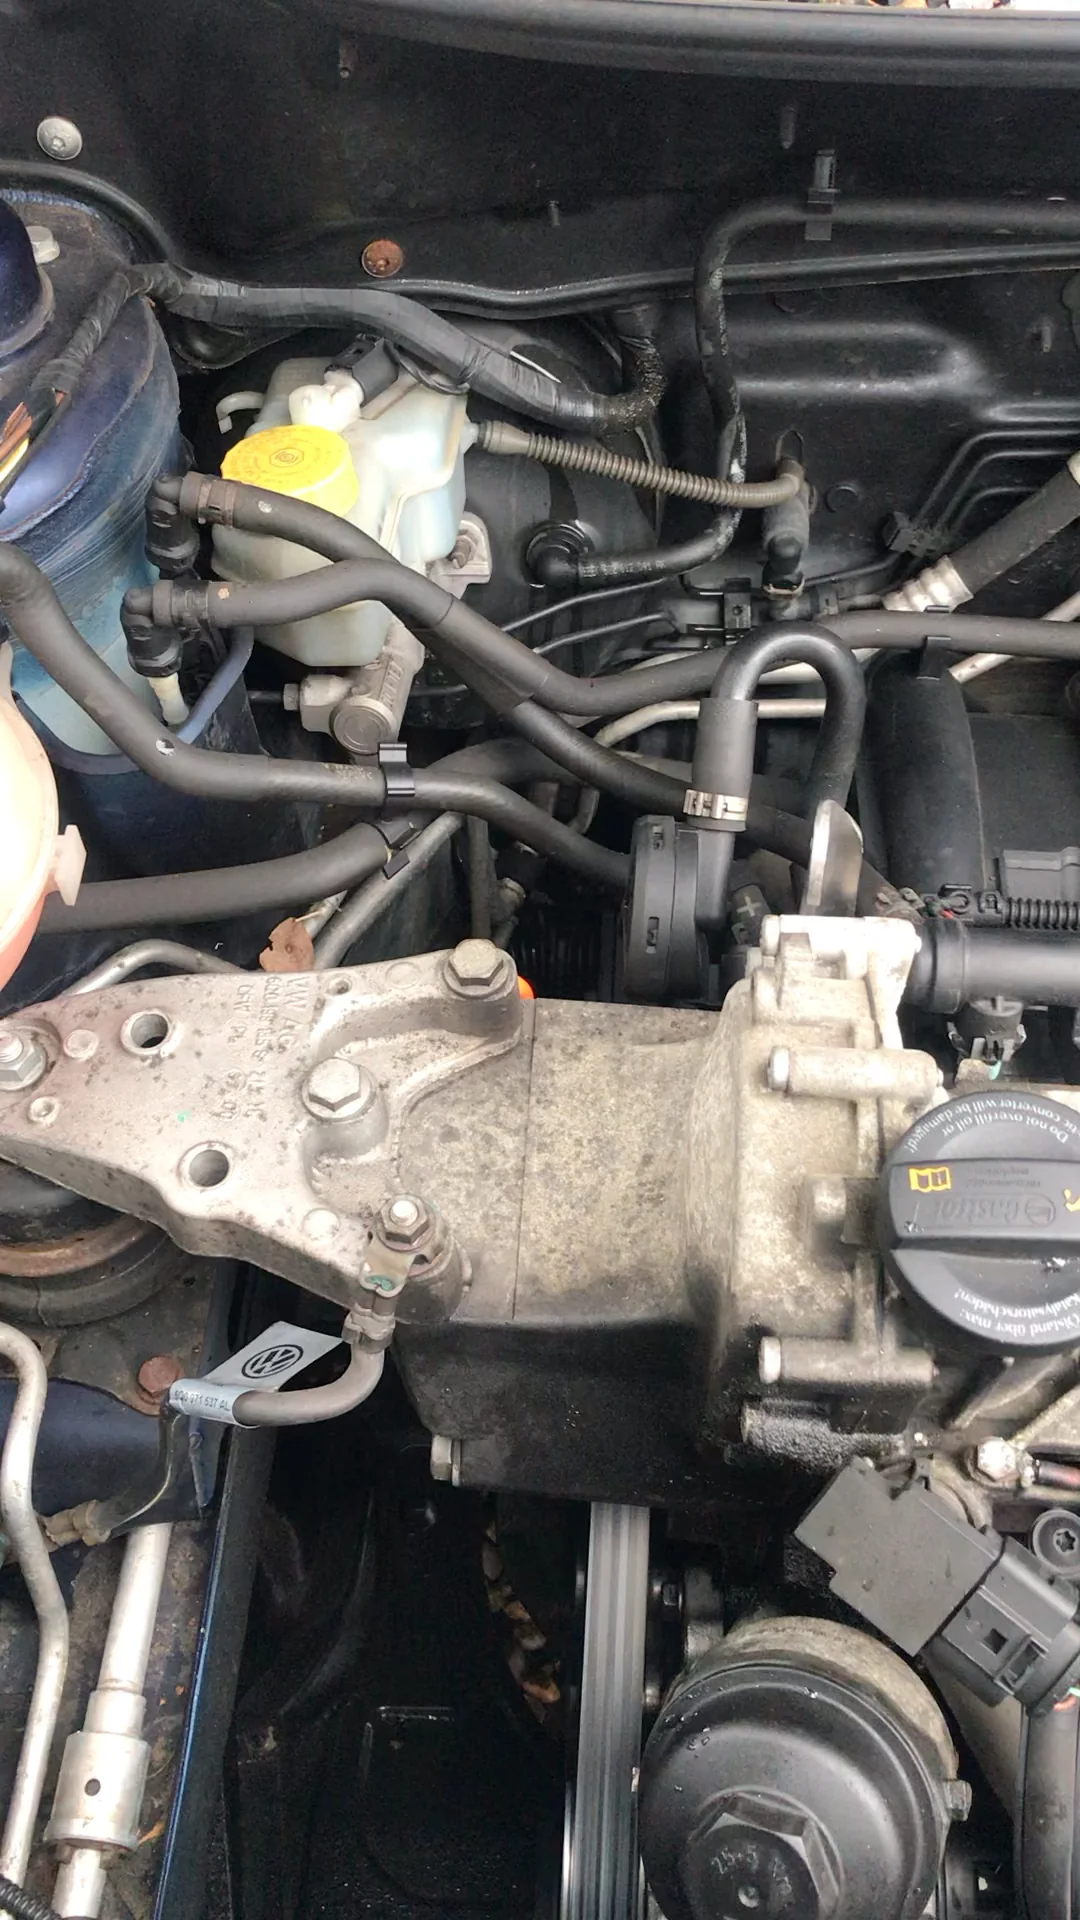 High Pitched Noise After Replacing Alternator!?